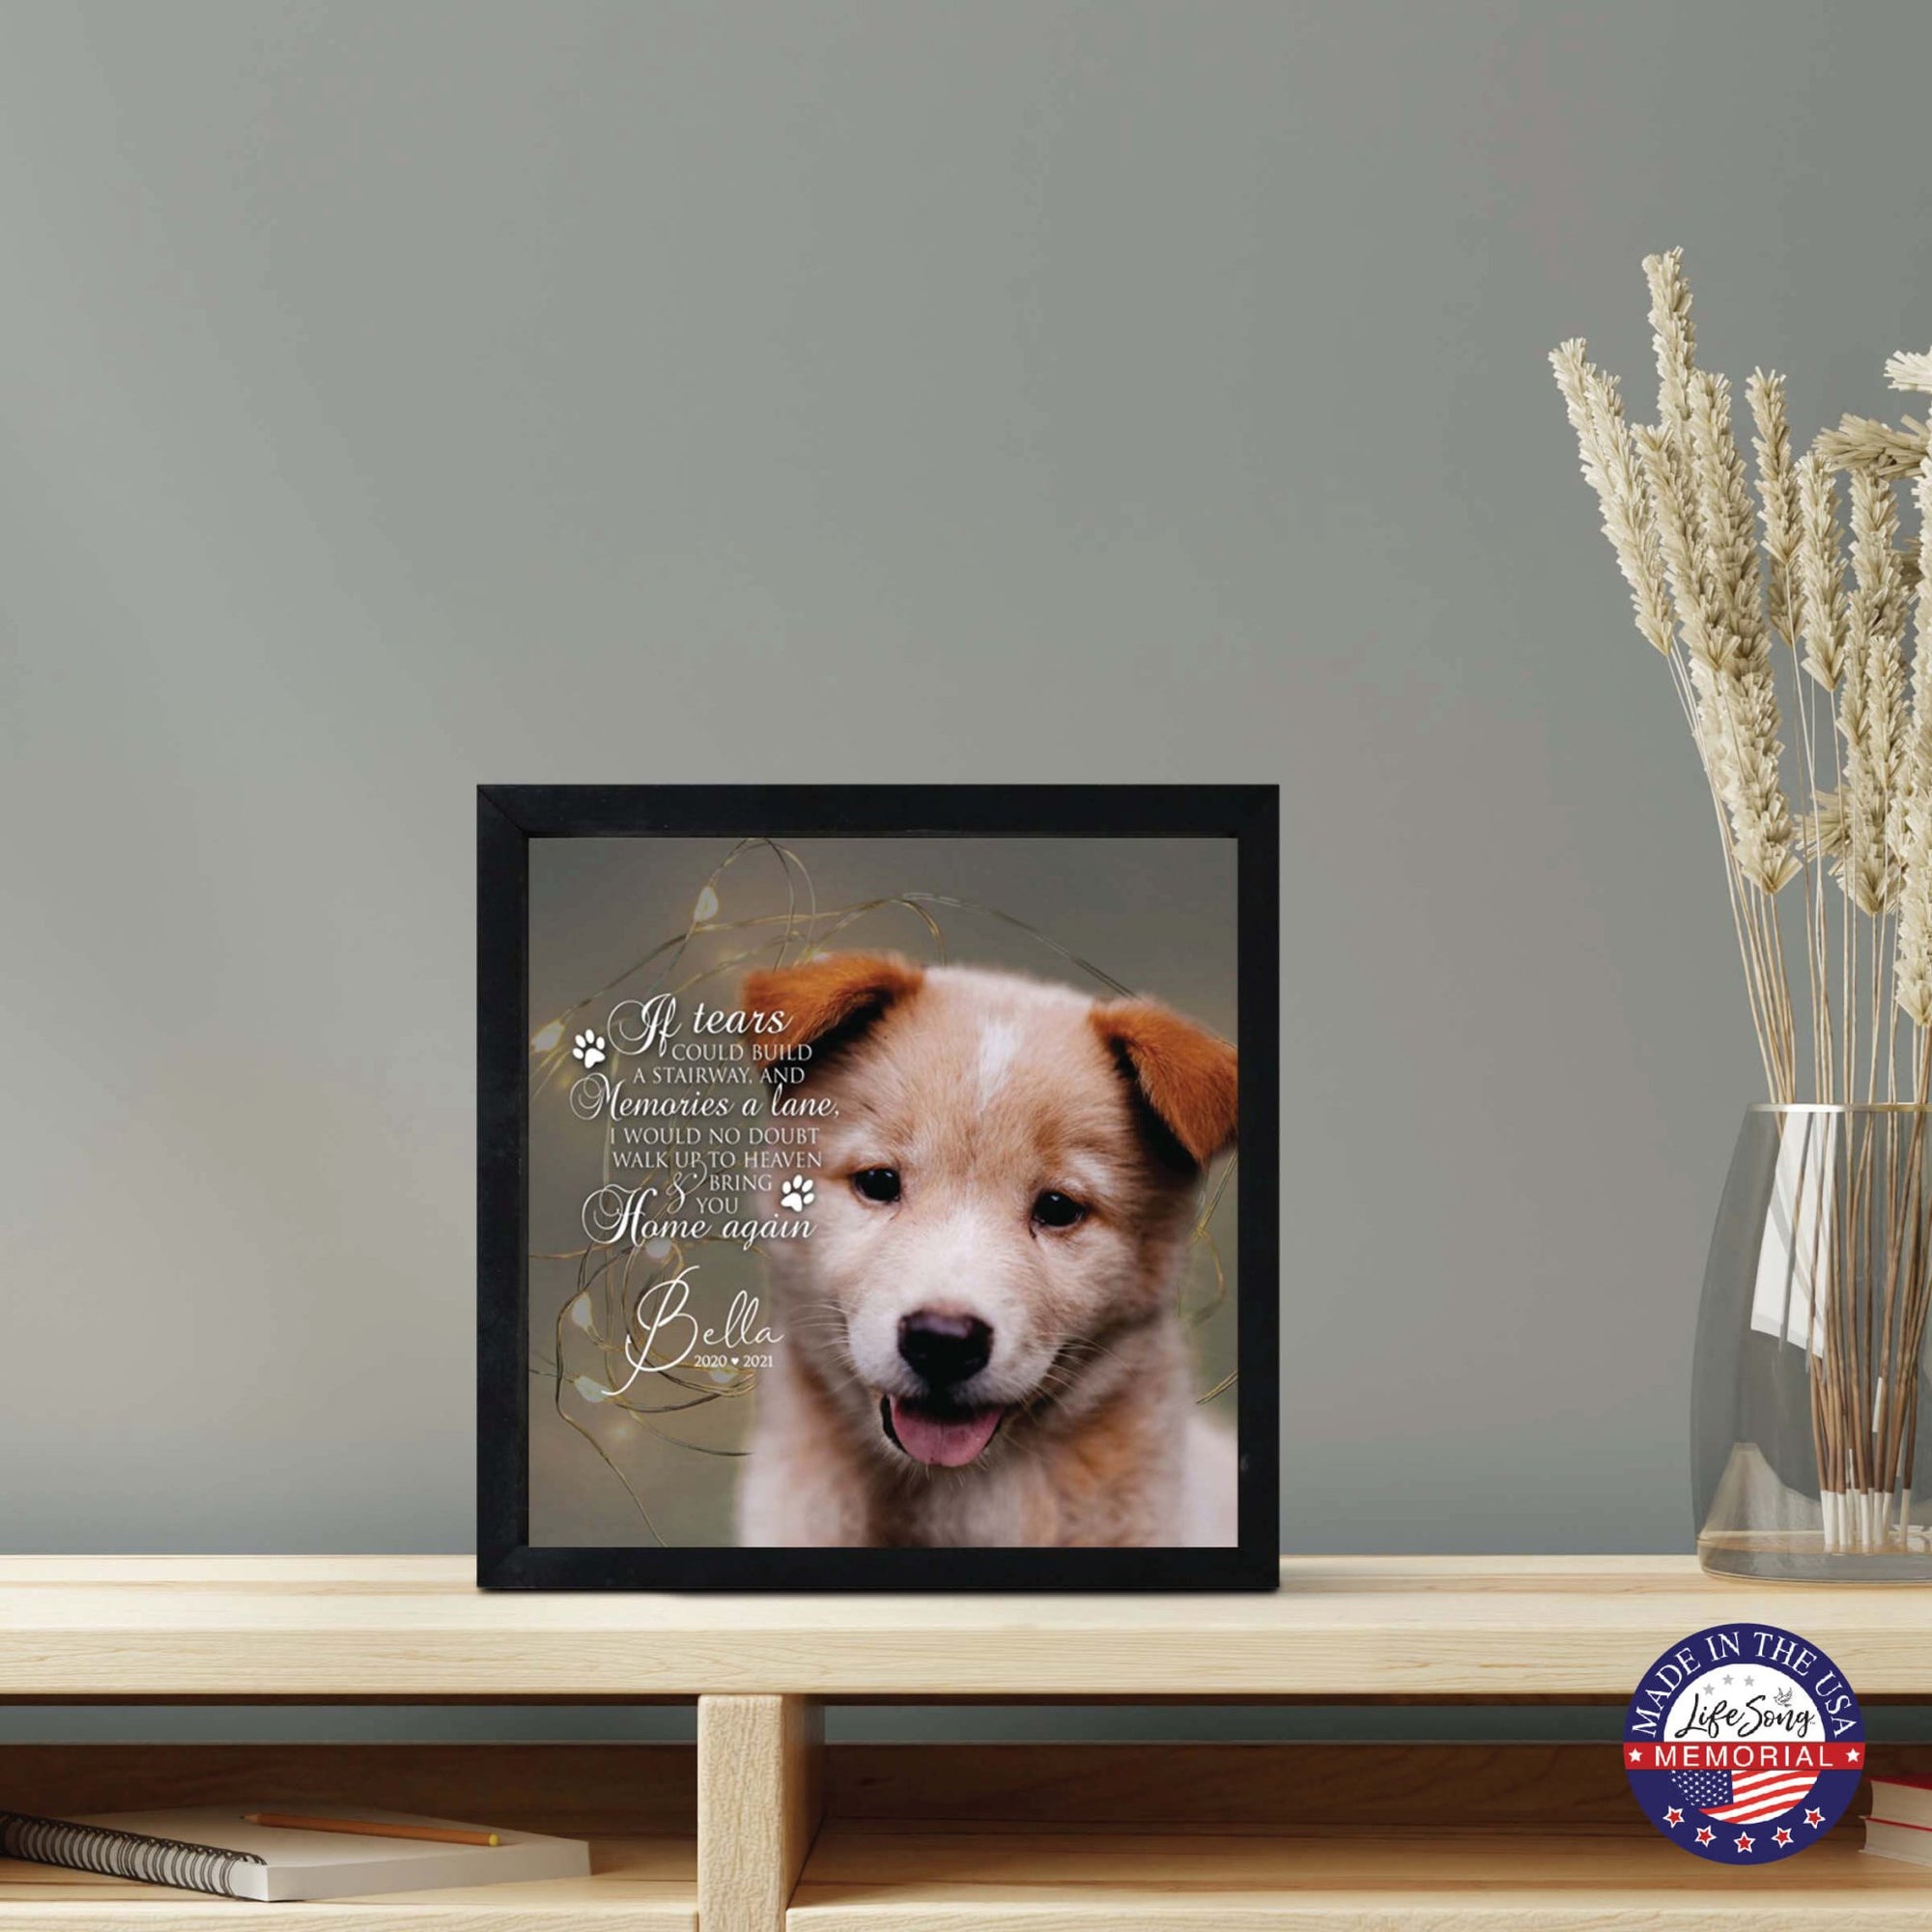 Custom Pet Memorial Framed Shadow Box Wall Décor for the Loss of Beloved Pet - If Tears Could Build - LifeSong Milestones